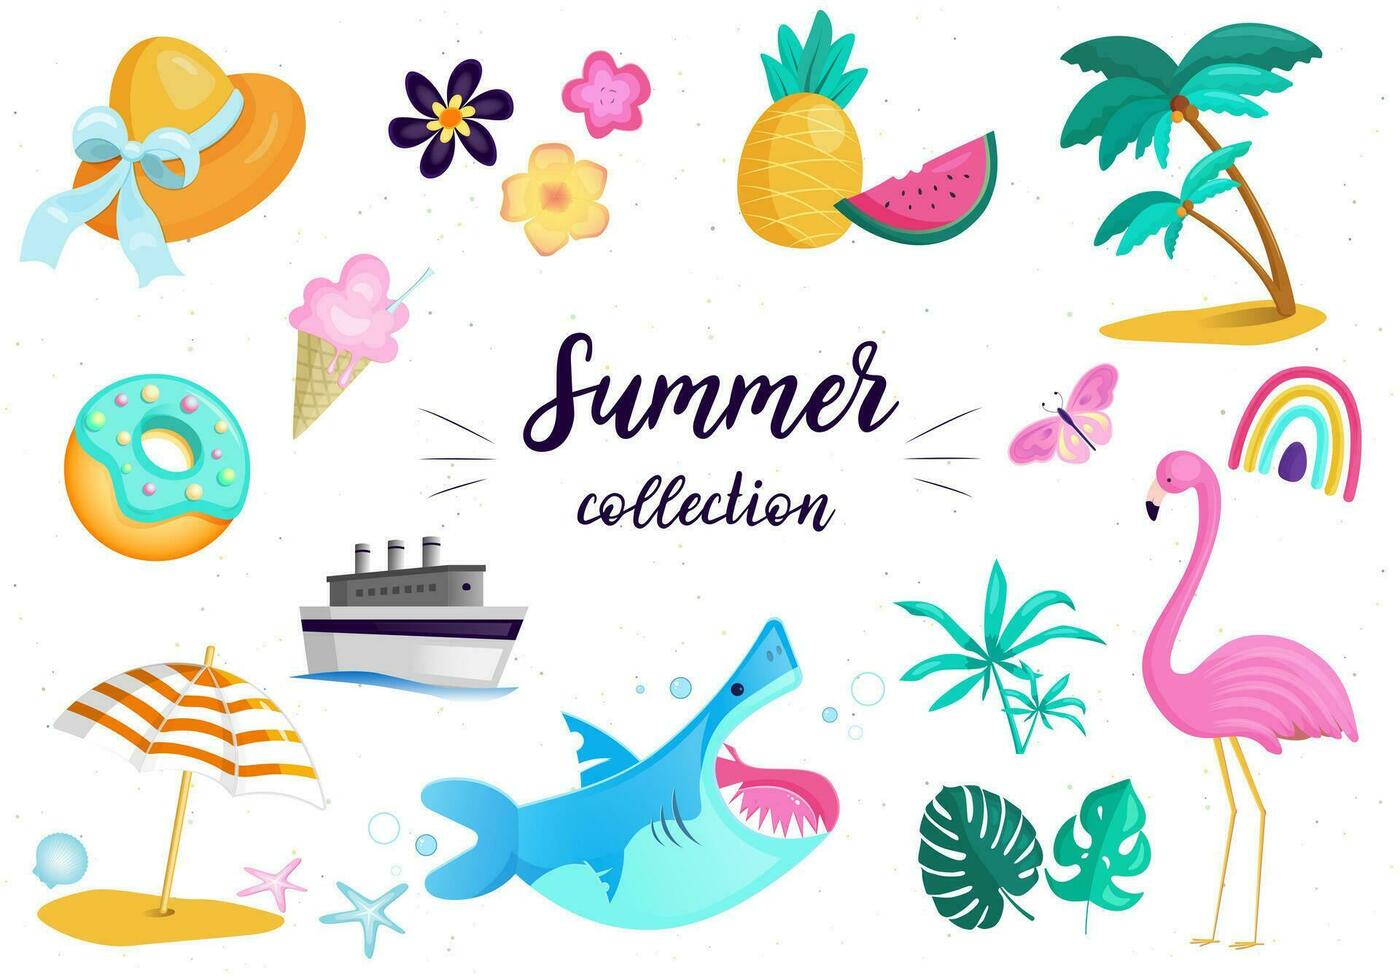 Set of cute summer elements, palm tree, beach umbrella, tropical flowers, flamingo. Perfect for summertime poster, card, scrapbooking, invitation. vector